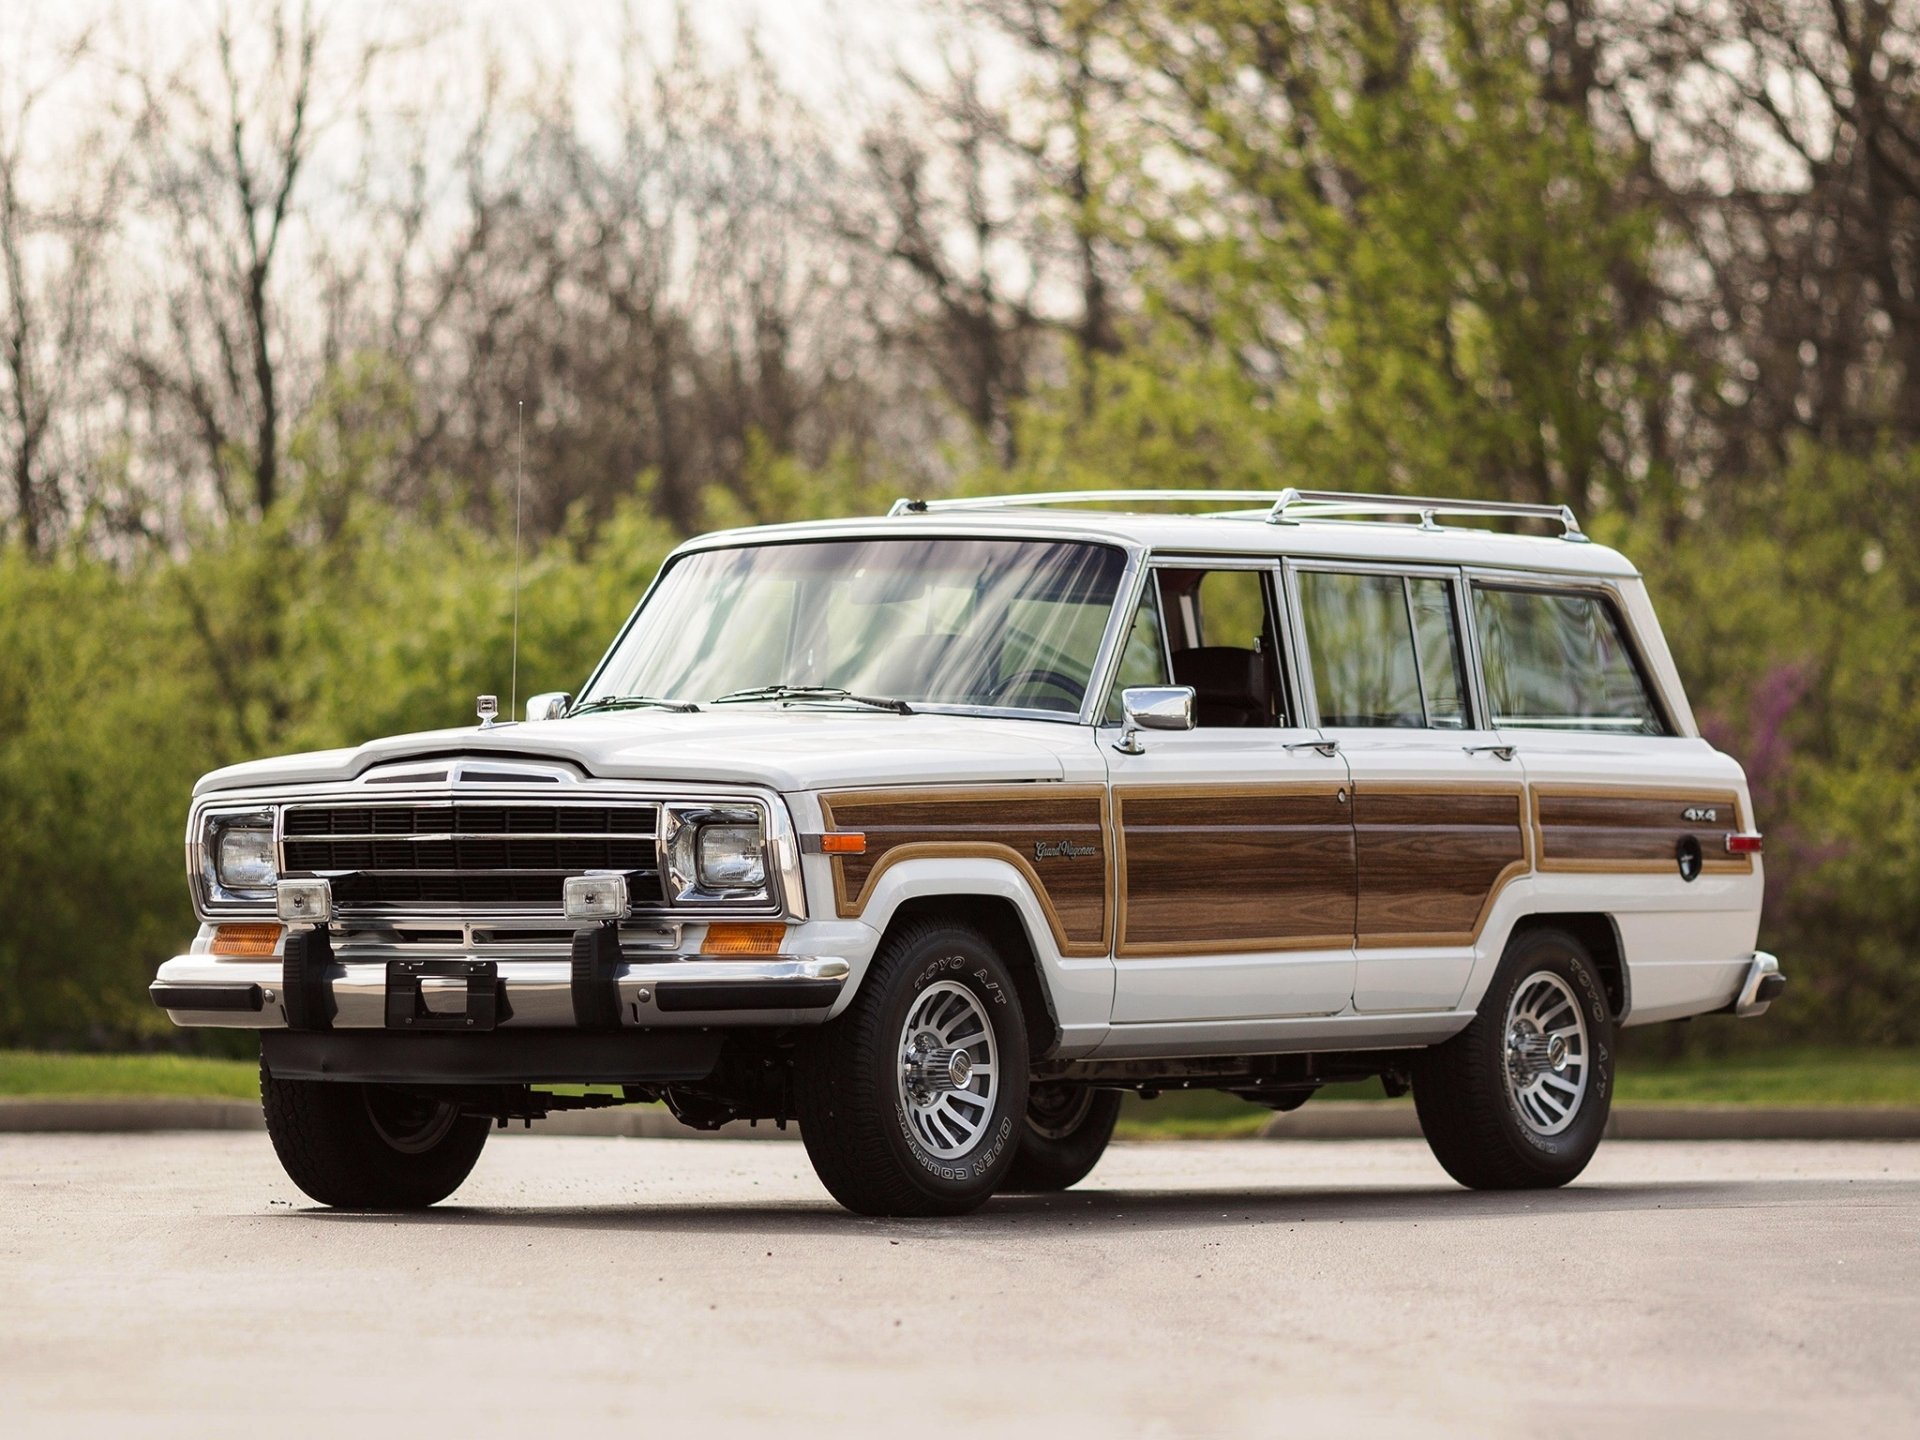 1 Jeep Grand Wagoneer Hd Wallpapers Background Images Wallpaper Abyss